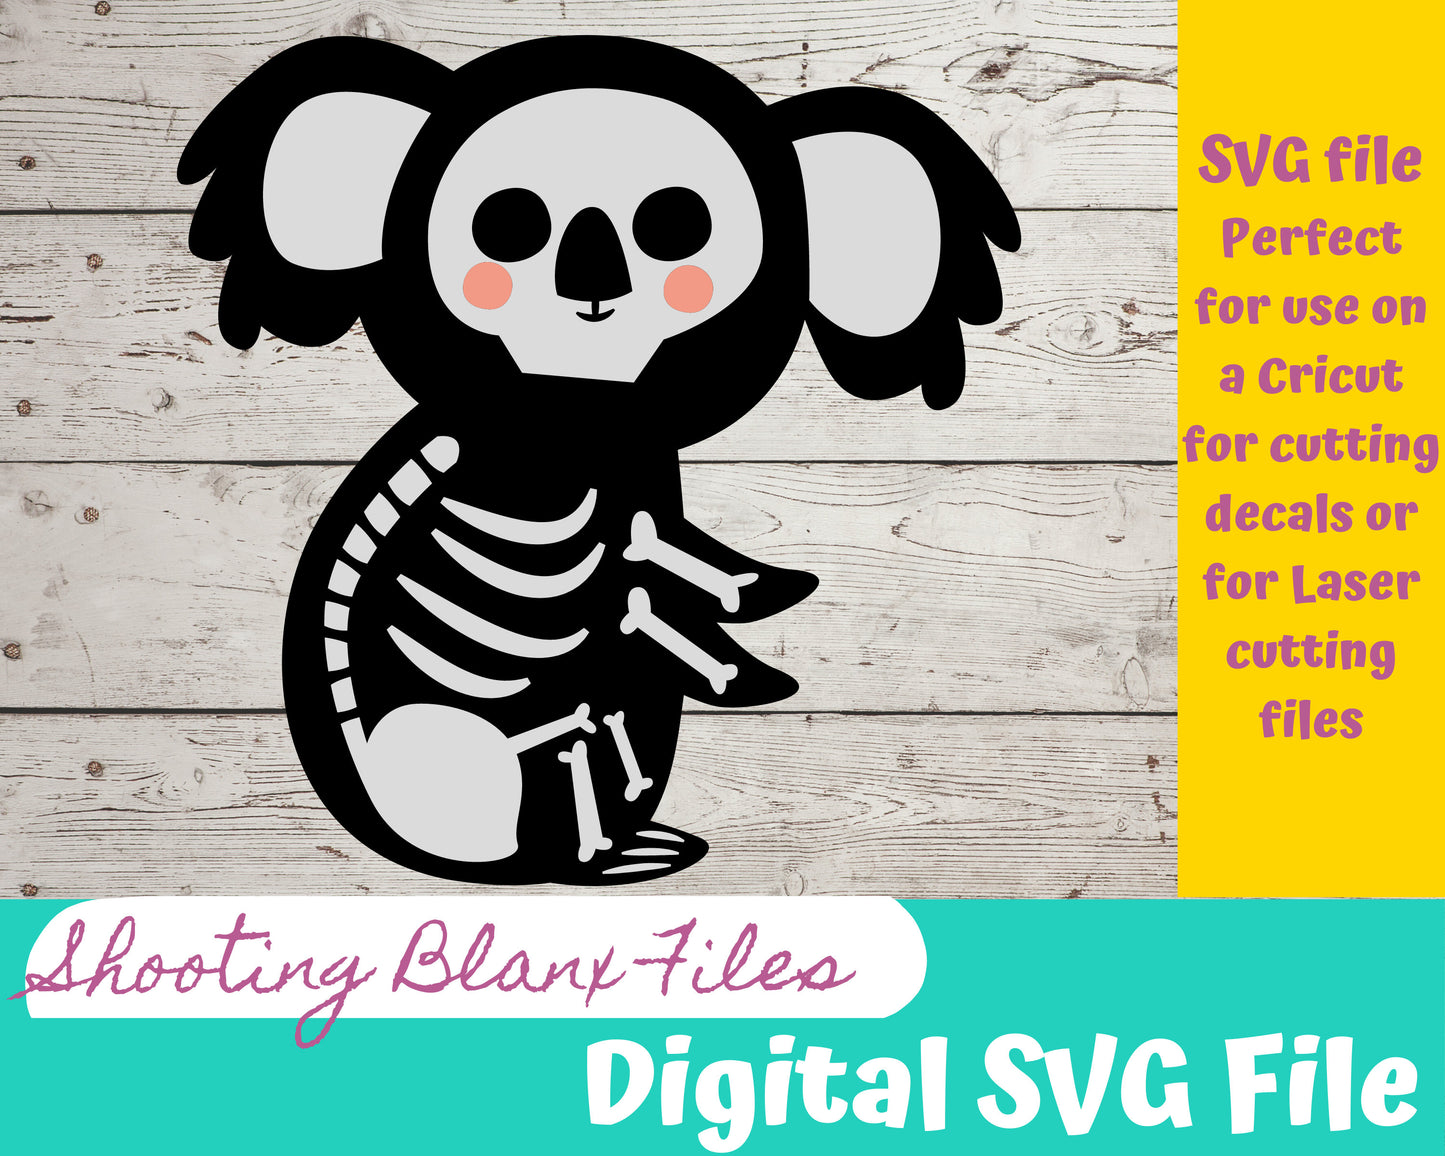 Koala Skeleton SVG file perfect for Cricut, Cameo, or Silhouette also for laser engraving Glowforge, Scary, Halloween, animal